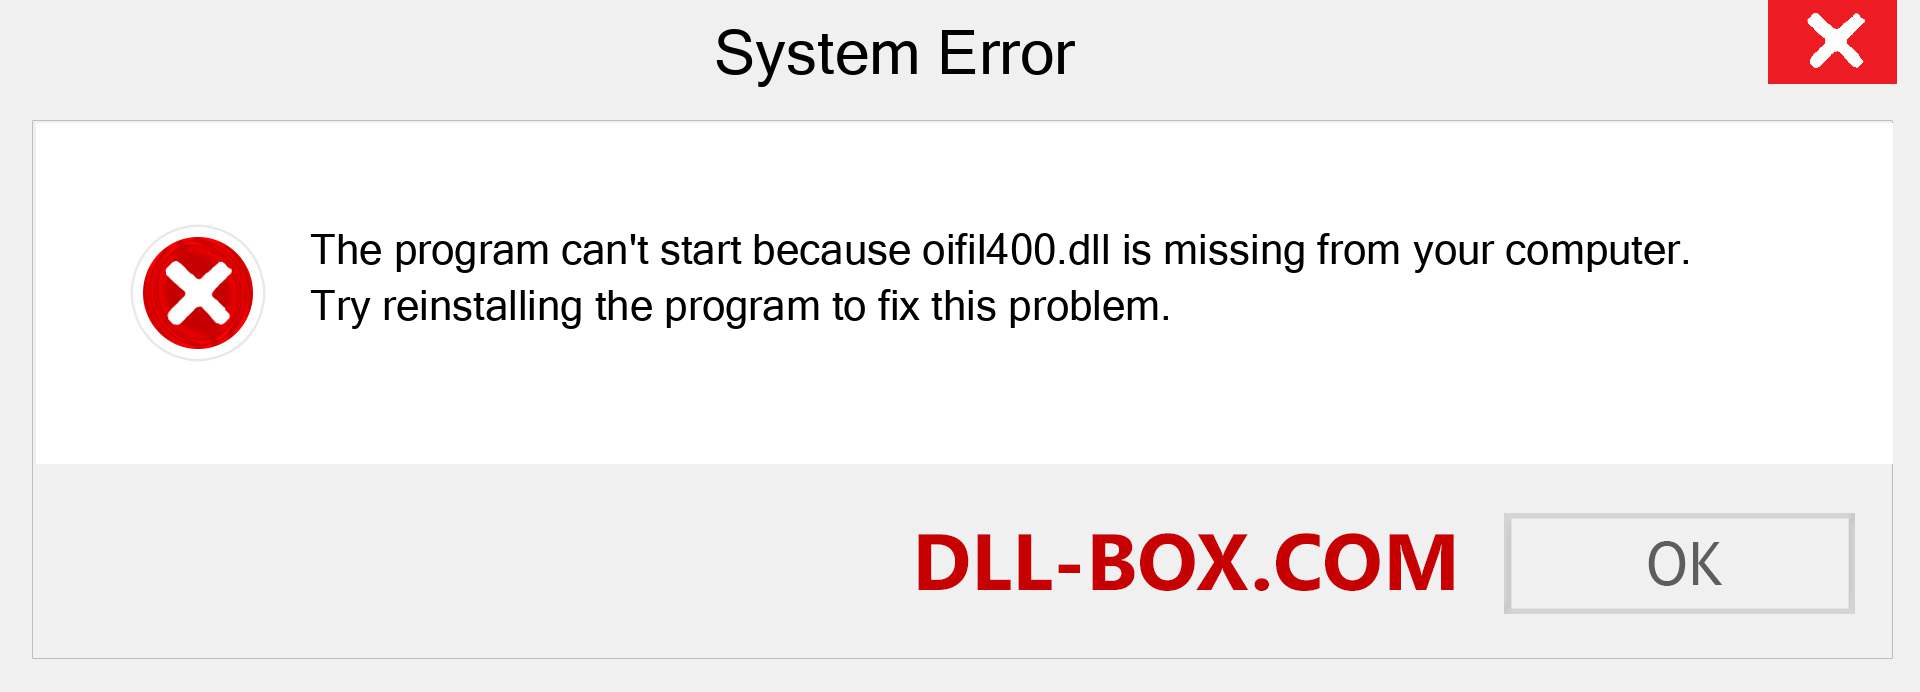  oifil400.dll file is missing?. Download for Windows 7, 8, 10 - Fix  oifil400 dll Missing Error on Windows, photos, images